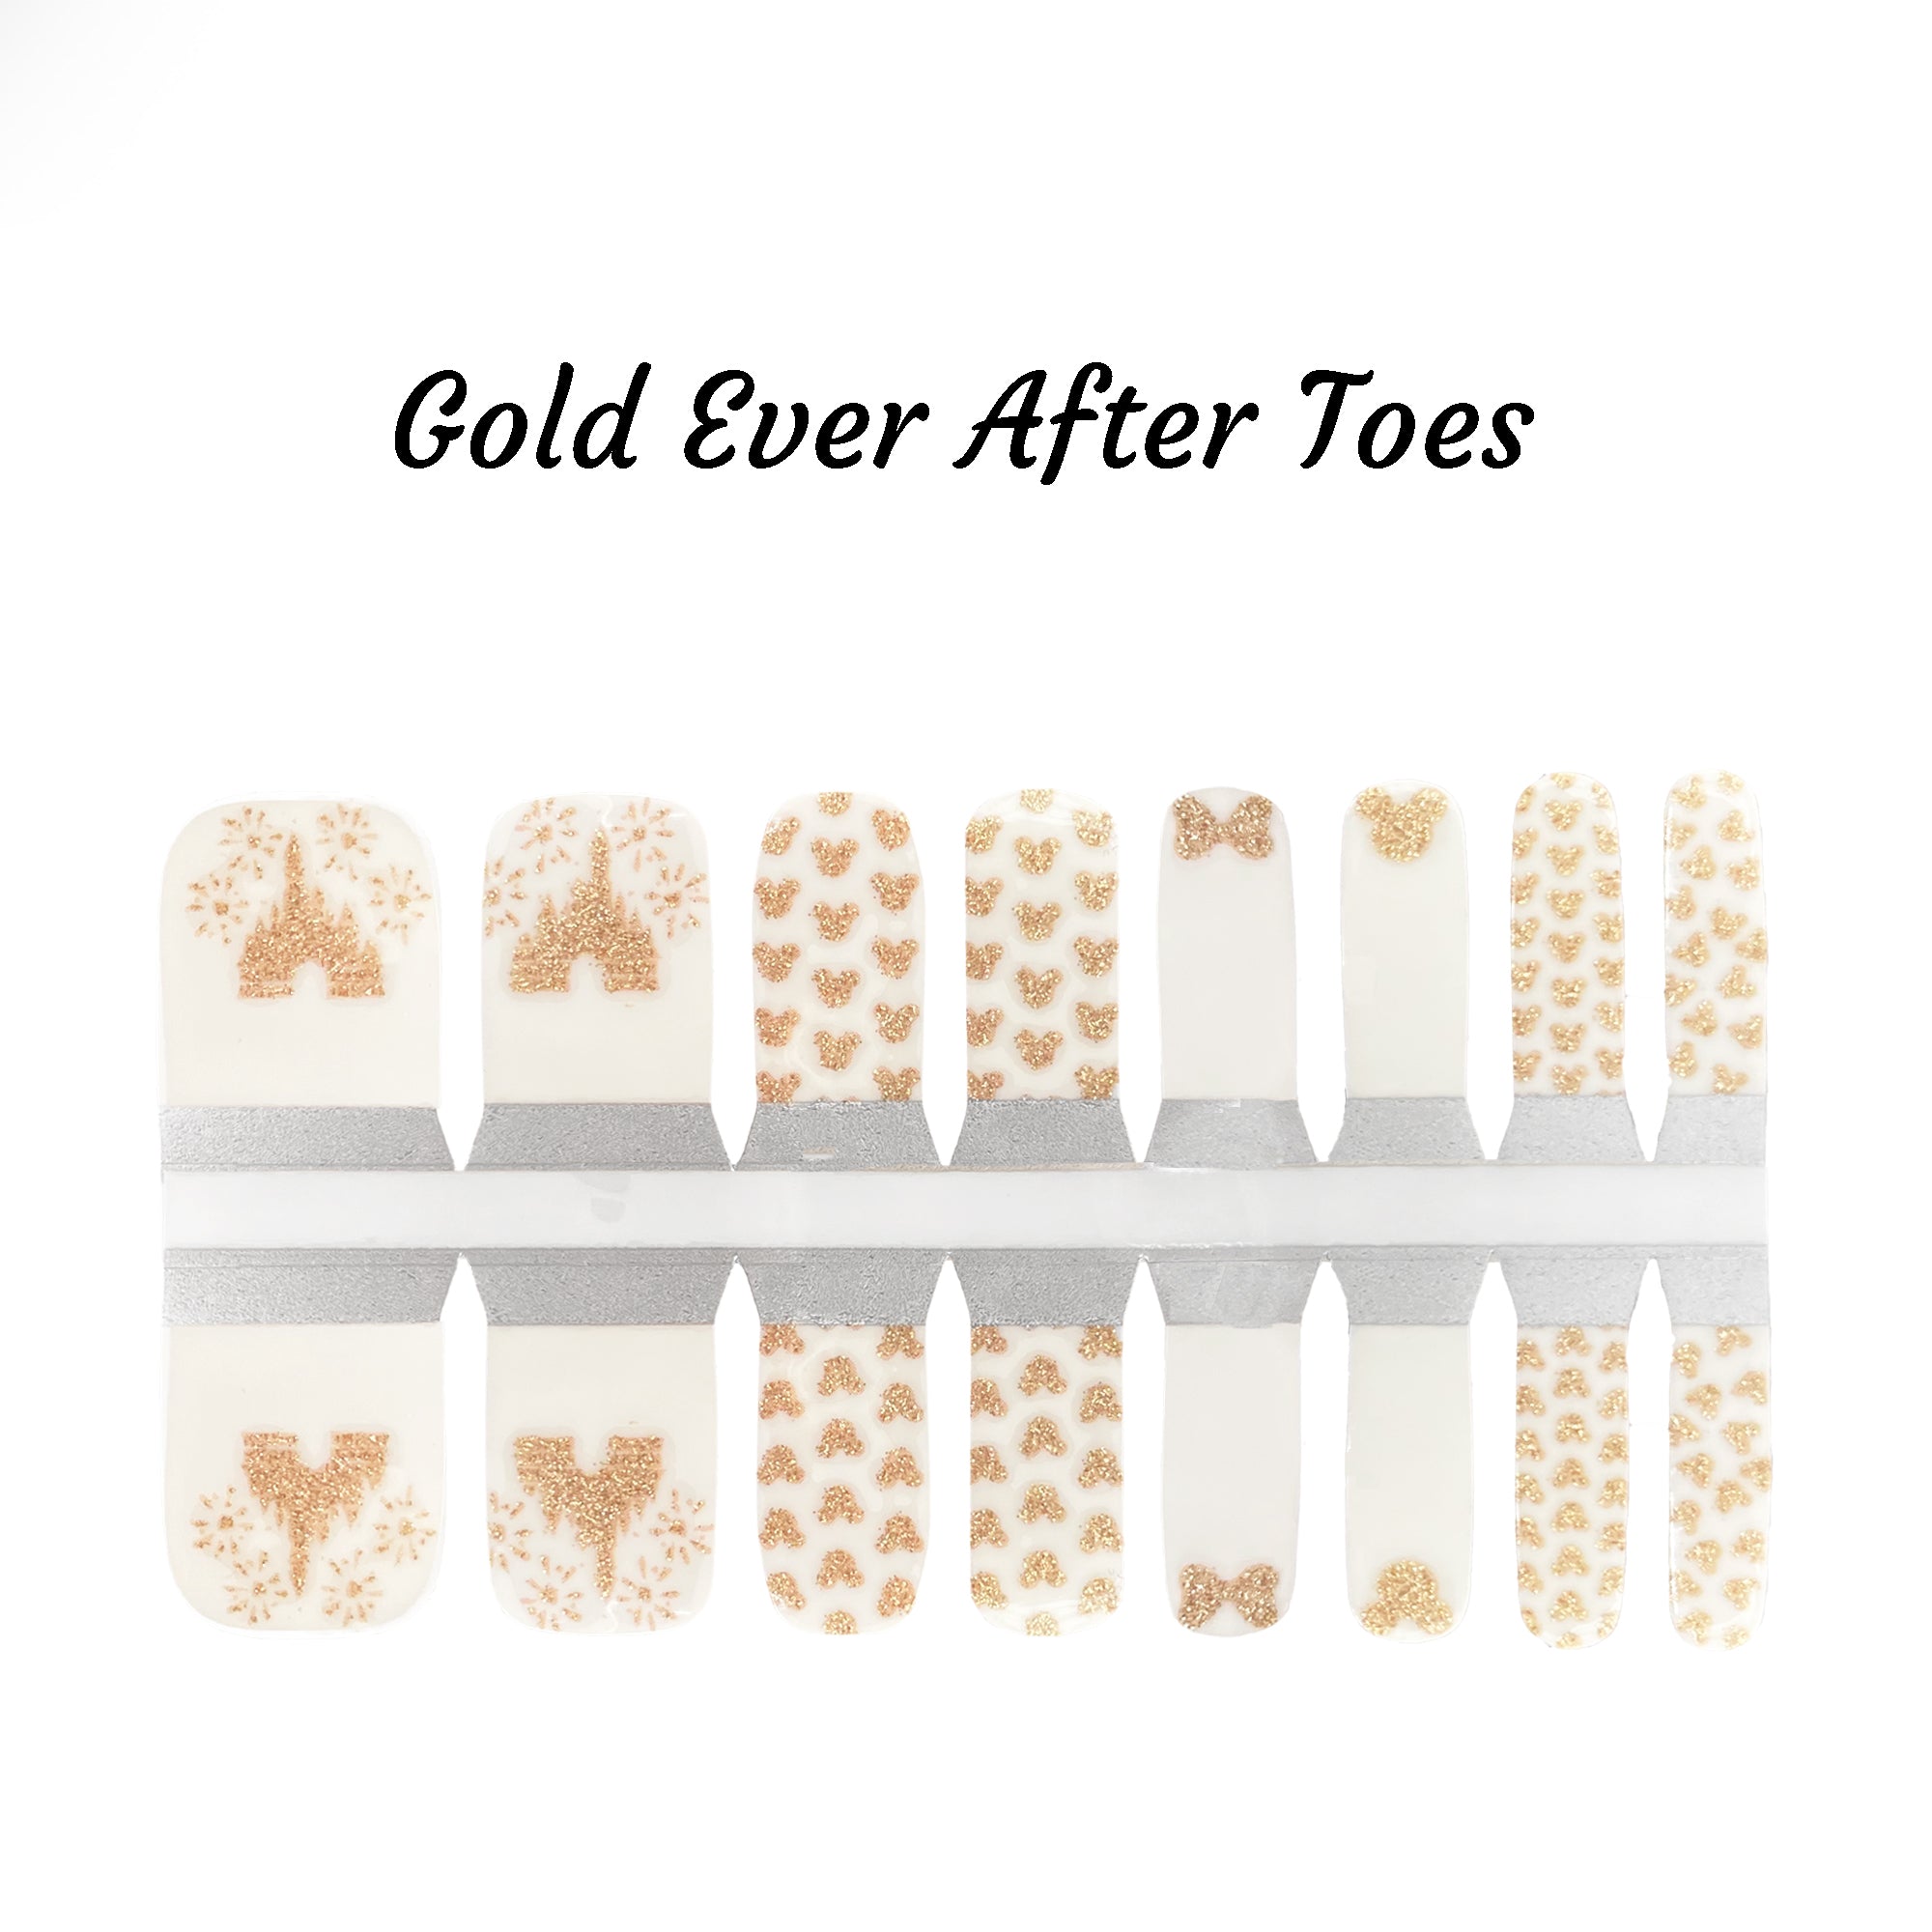 Gold Ever After Toes